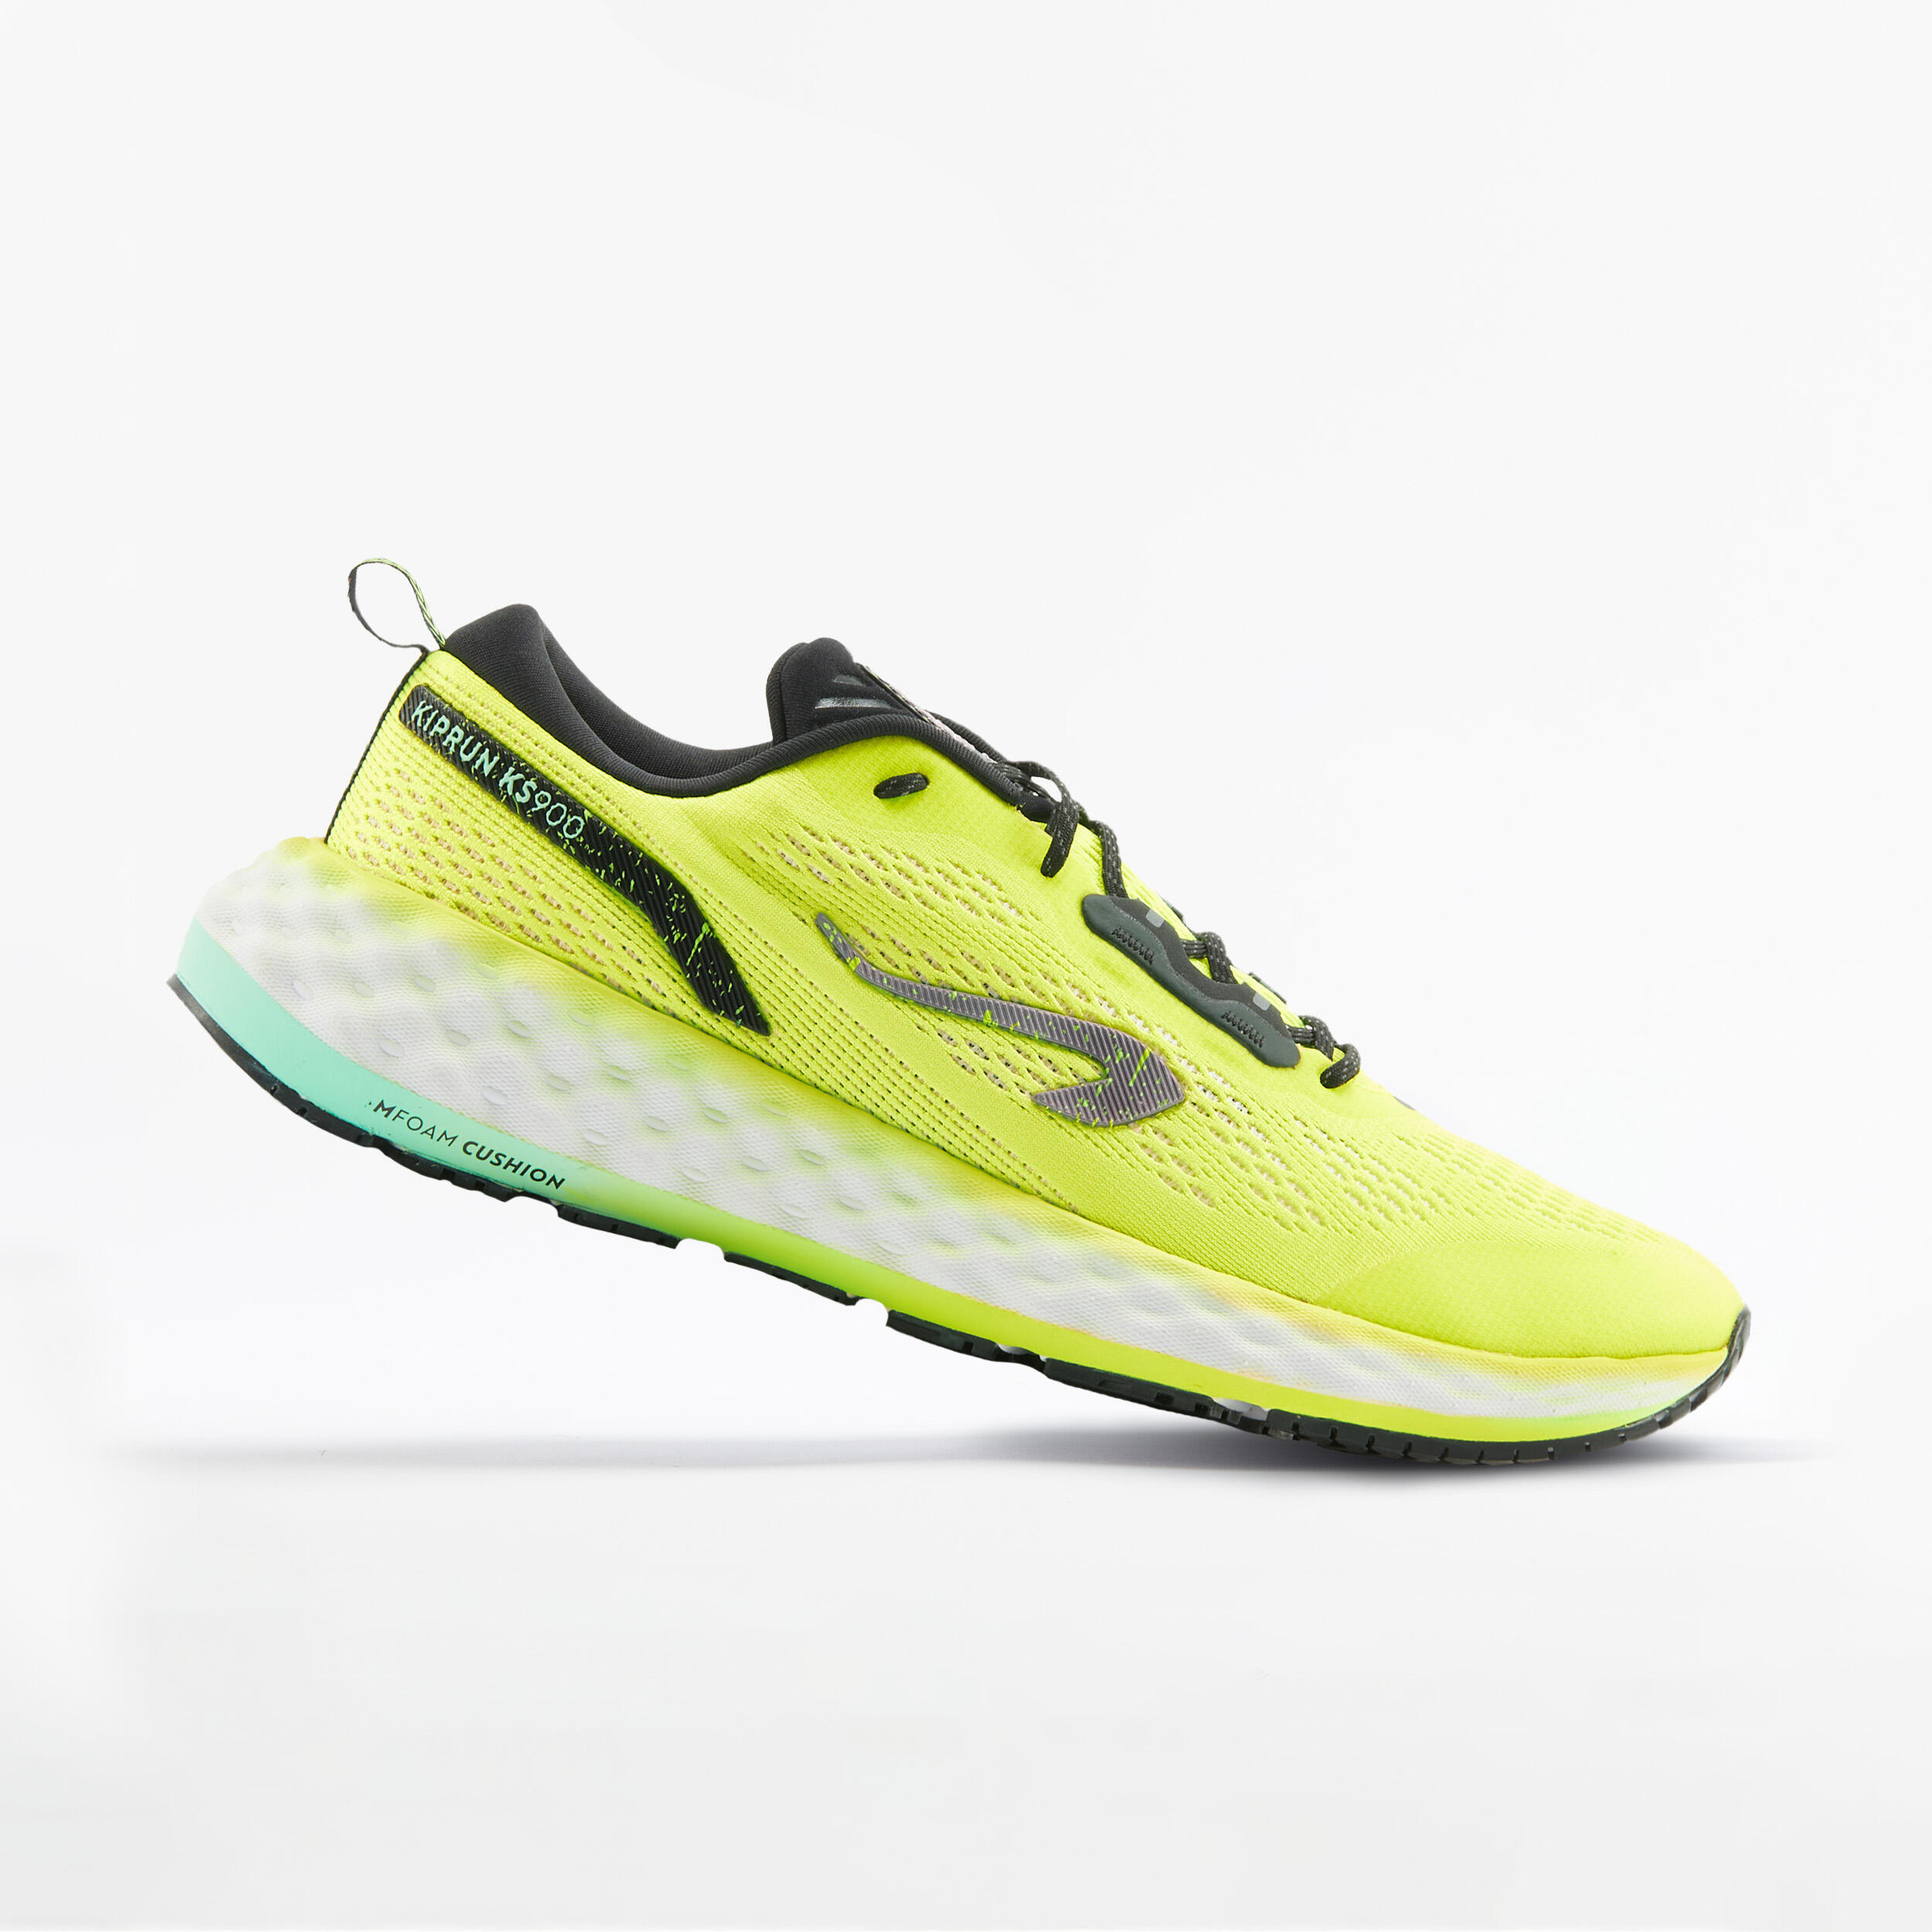 fluo lime yellow / fluo chlorophyll green / ultra white